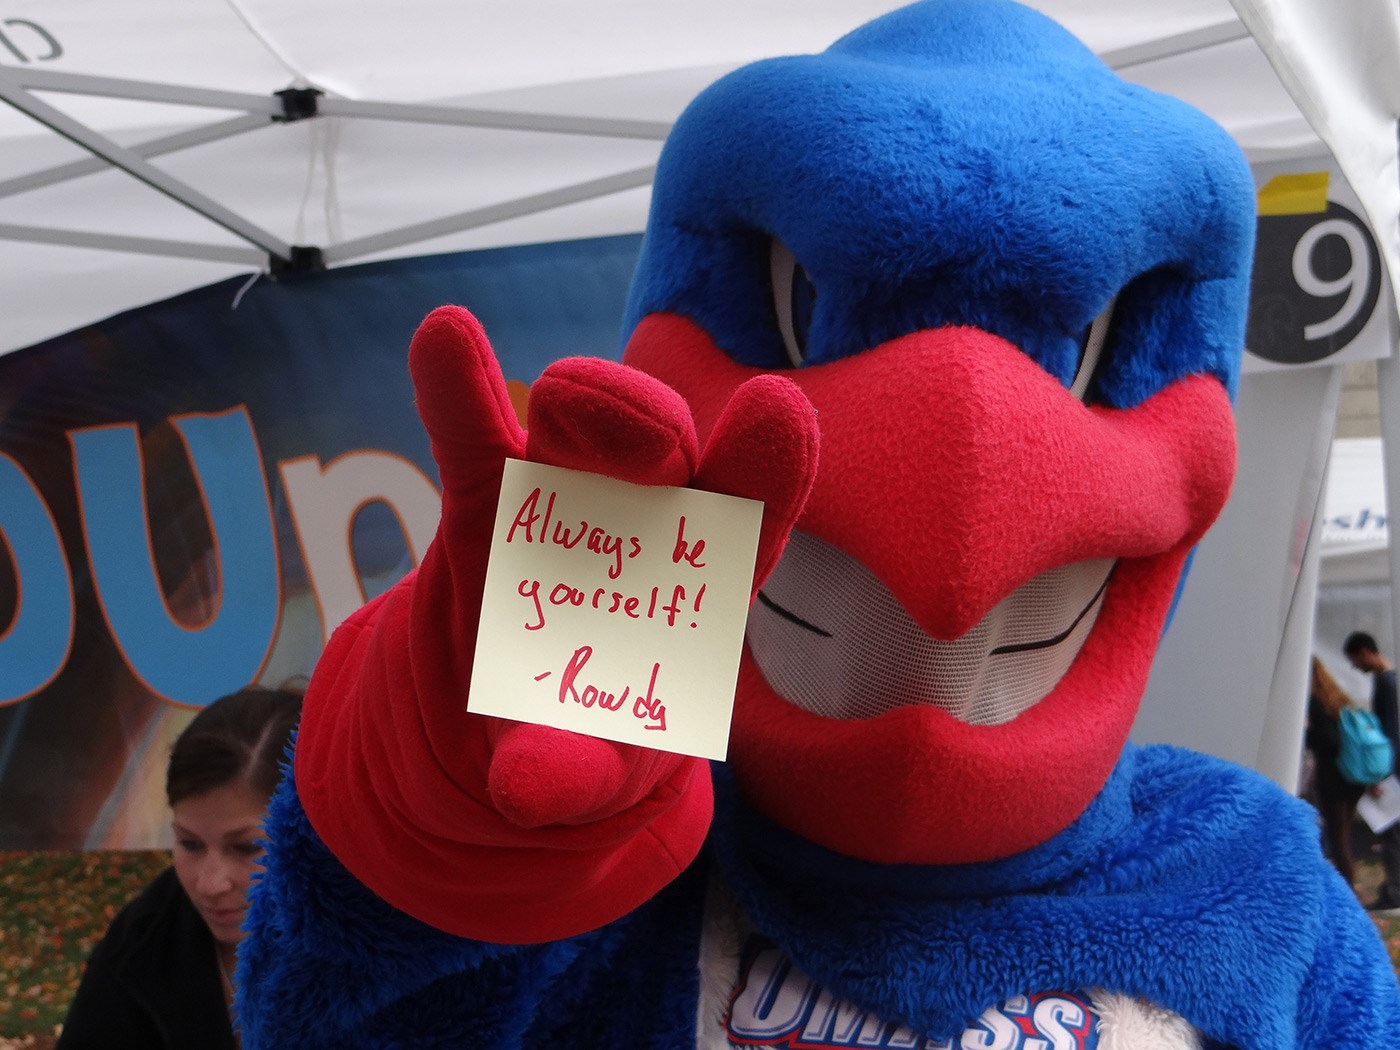 UMass Lowell mascot, Rowdy the River Hawk holding out a post-it note that say "Always be yourself!"